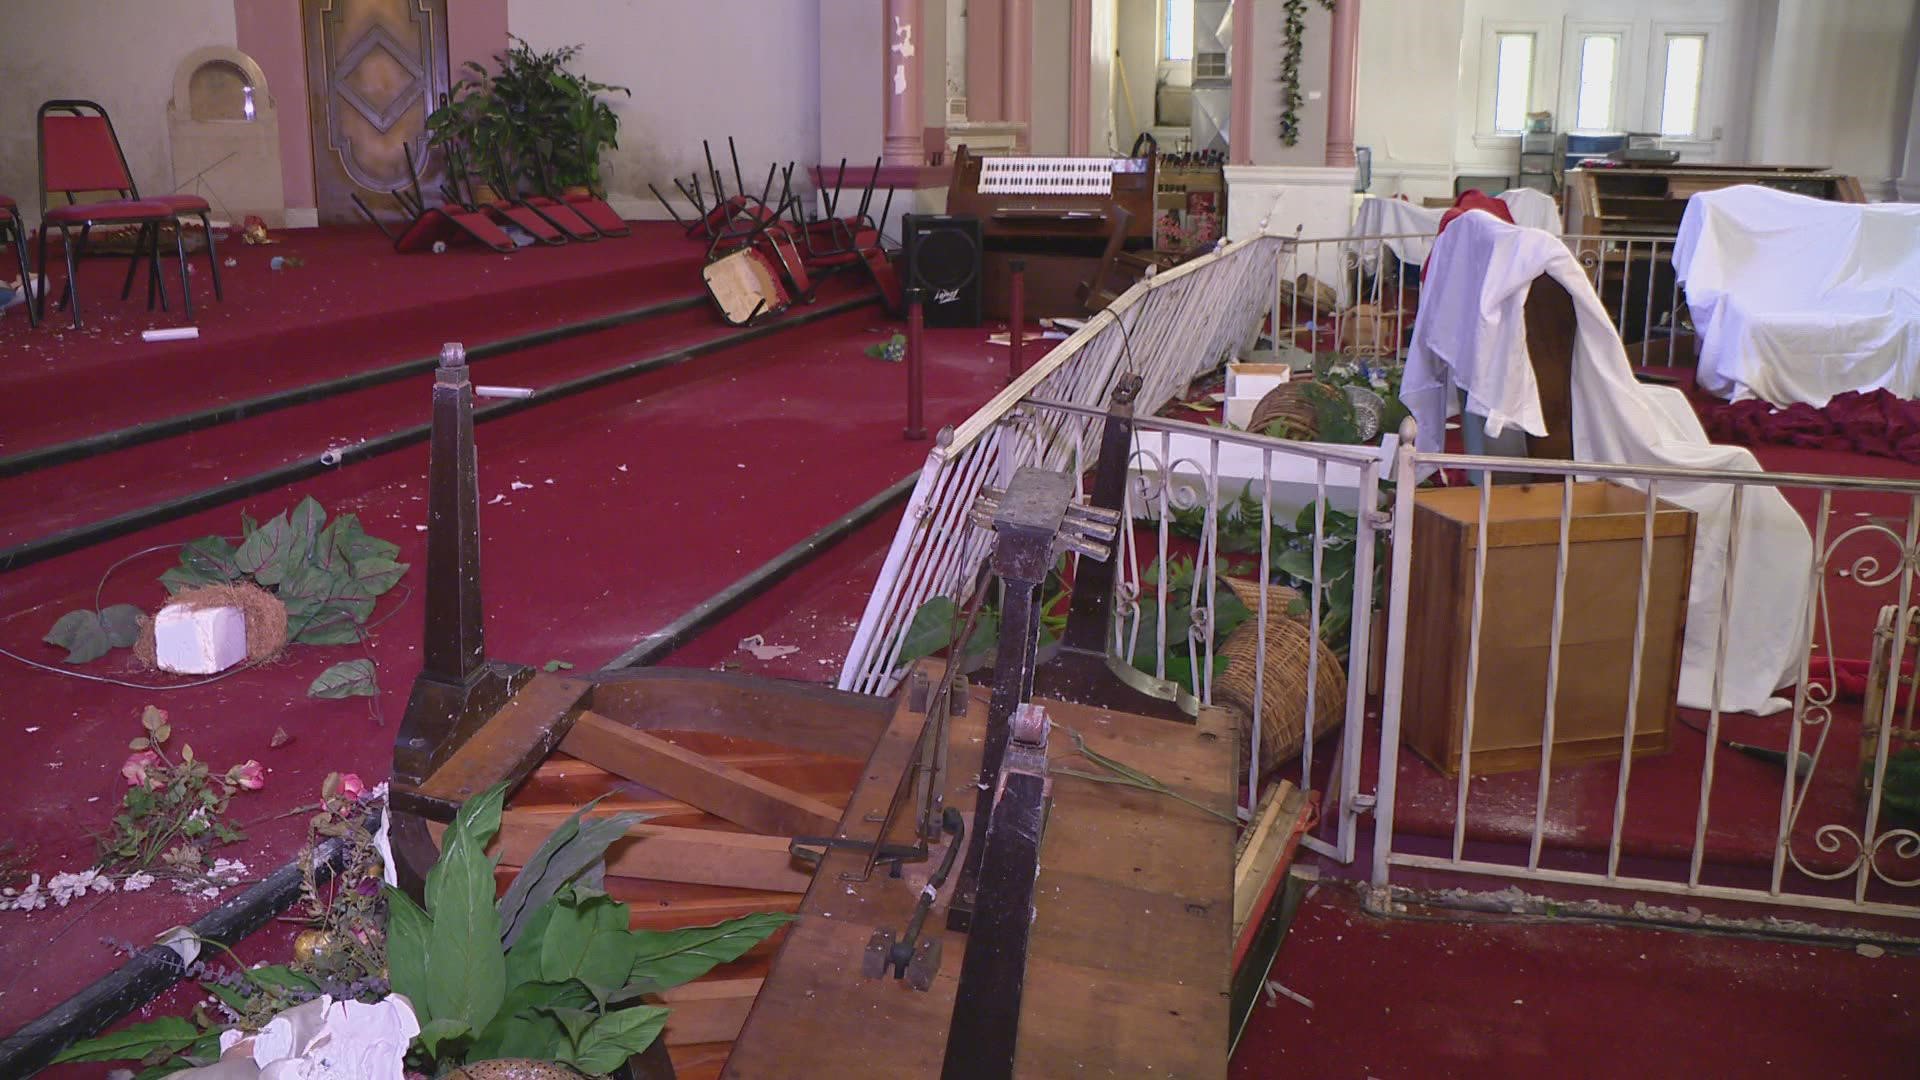 "It just hurts to see all that damage. I will pray for the people who did it," said Pastor Jack Hill Jr.